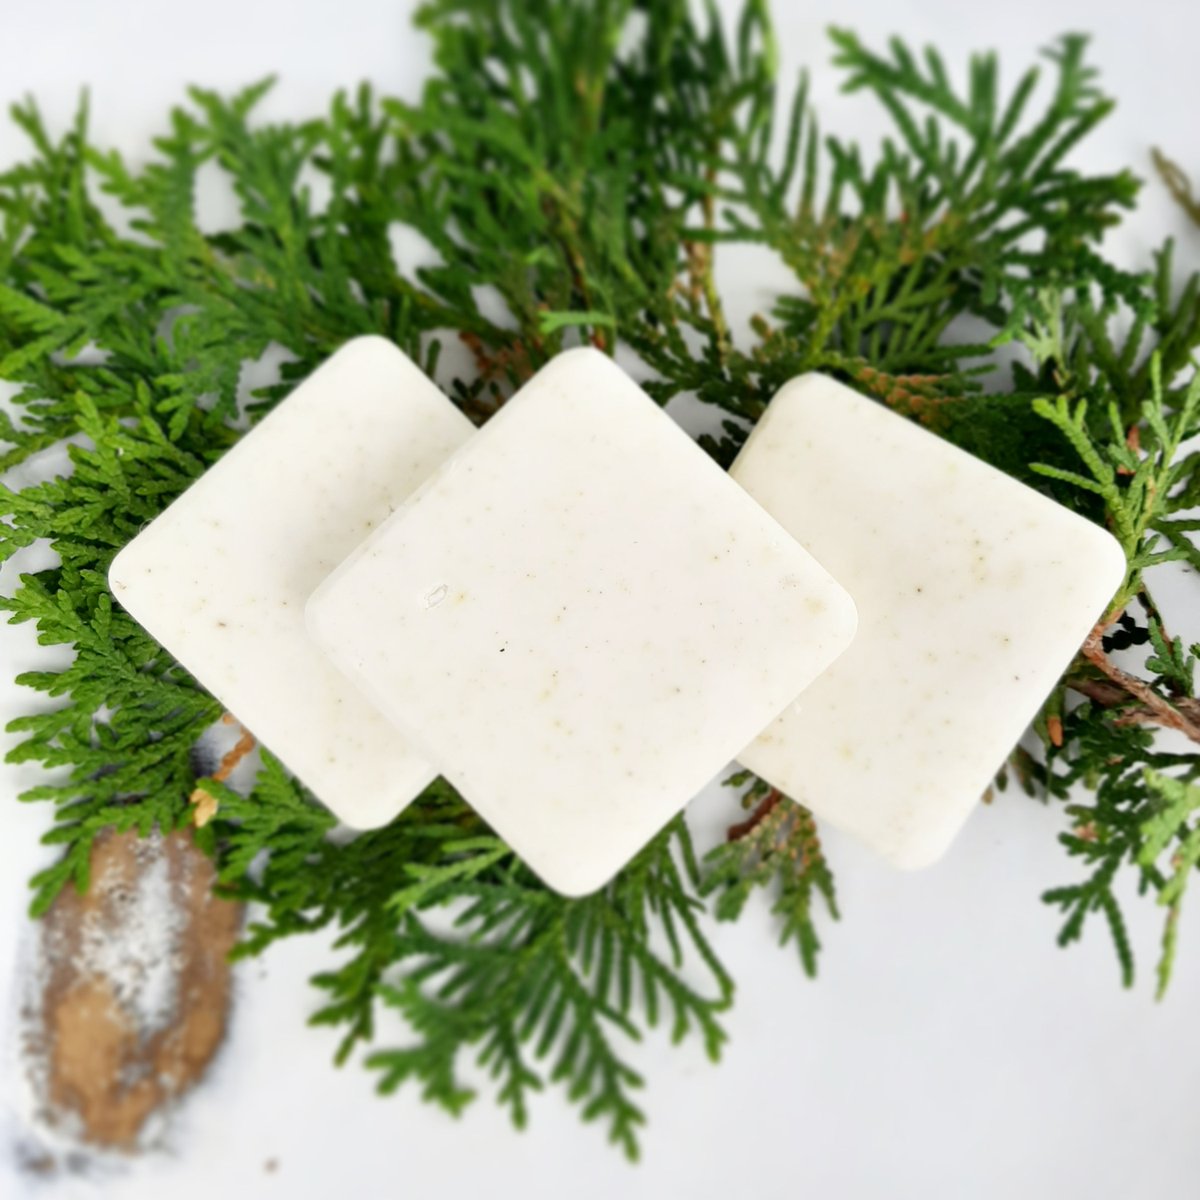 Excited to share the latest addition to my #etsy shop: Natural Soap etsy.me/2VcaOOO #white #christmas #green #soap #menssoap #beardsoap #whitesoap #soapbees #moisturizingsoap